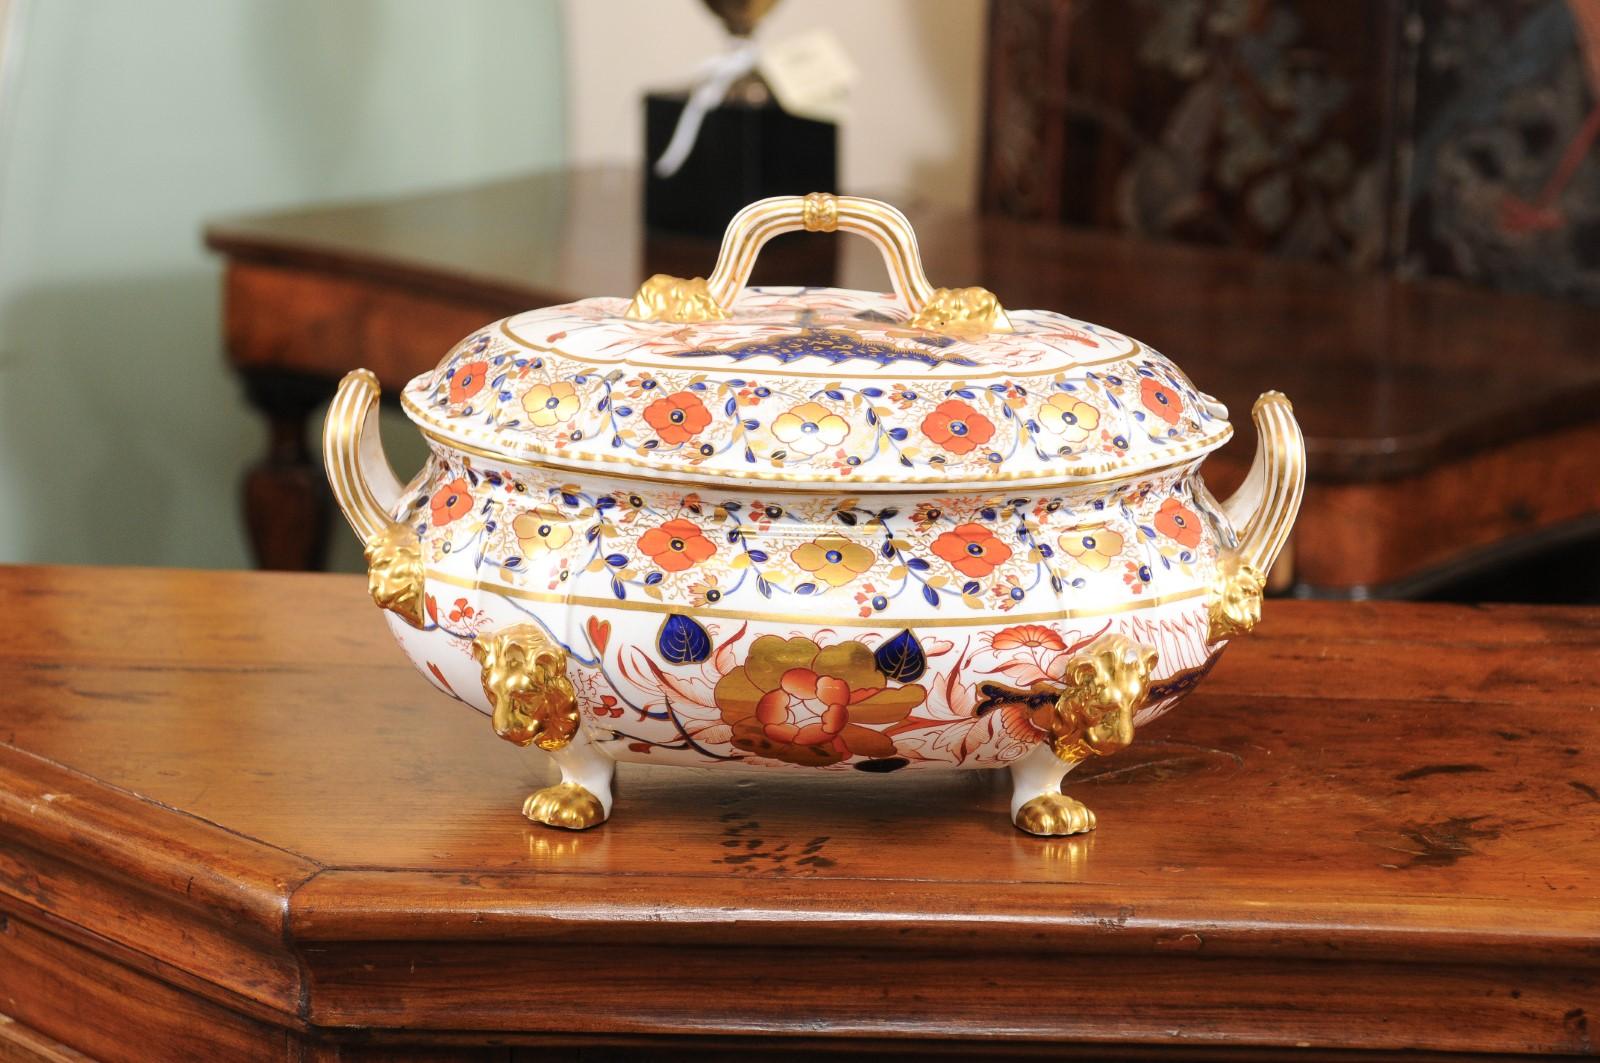 19th Century English Derby Porcelain Tureen with lid.